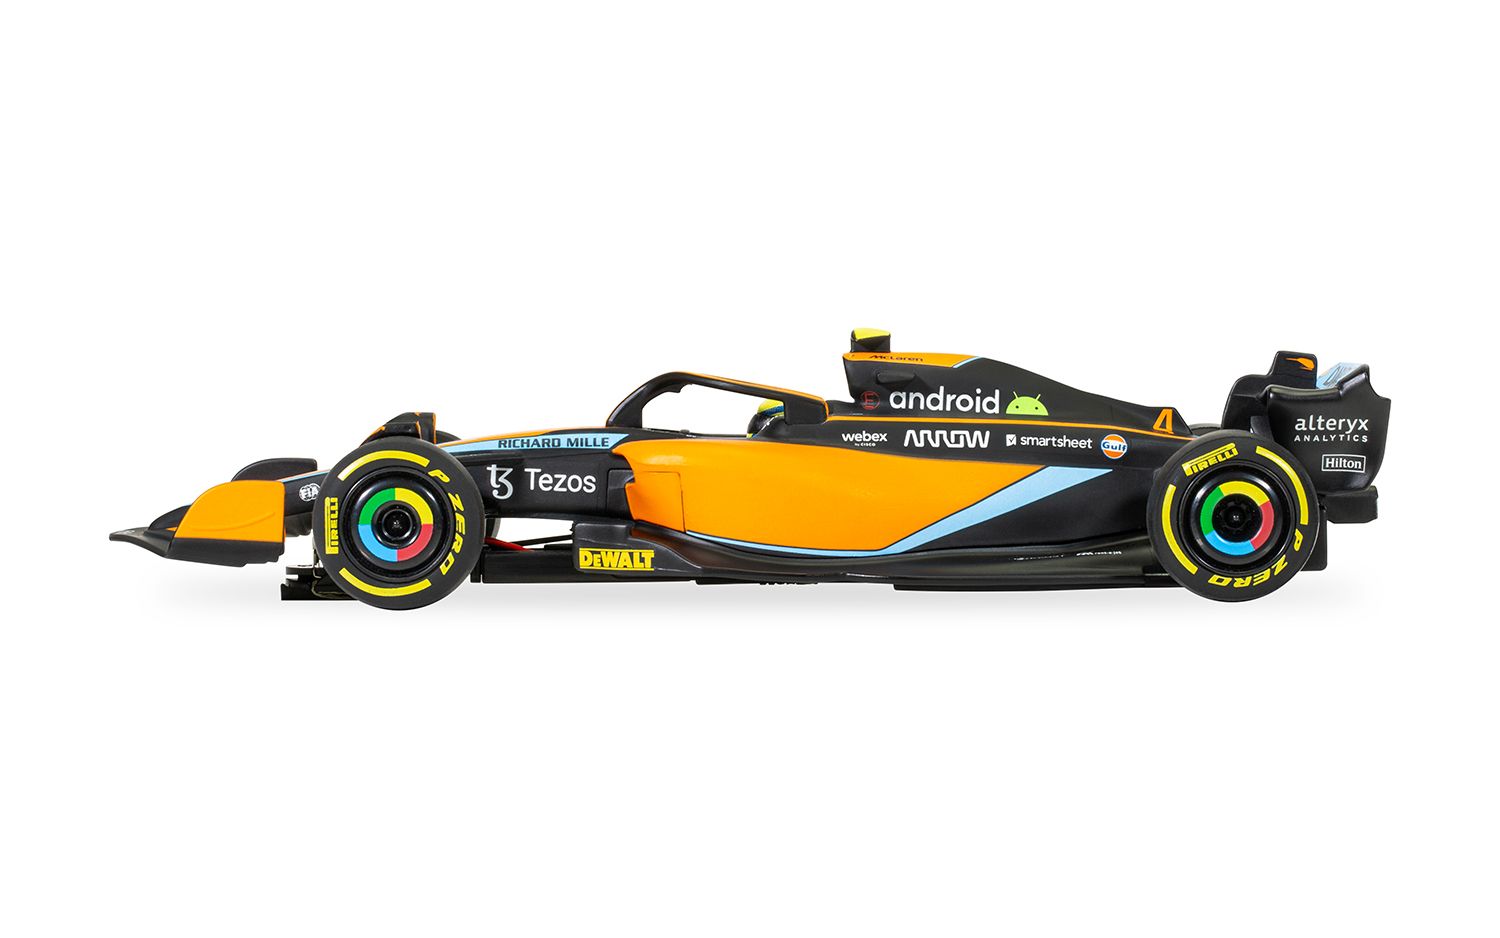 Gallery: McLaren Shows First Images of MCL36 for 2022 F1 Season